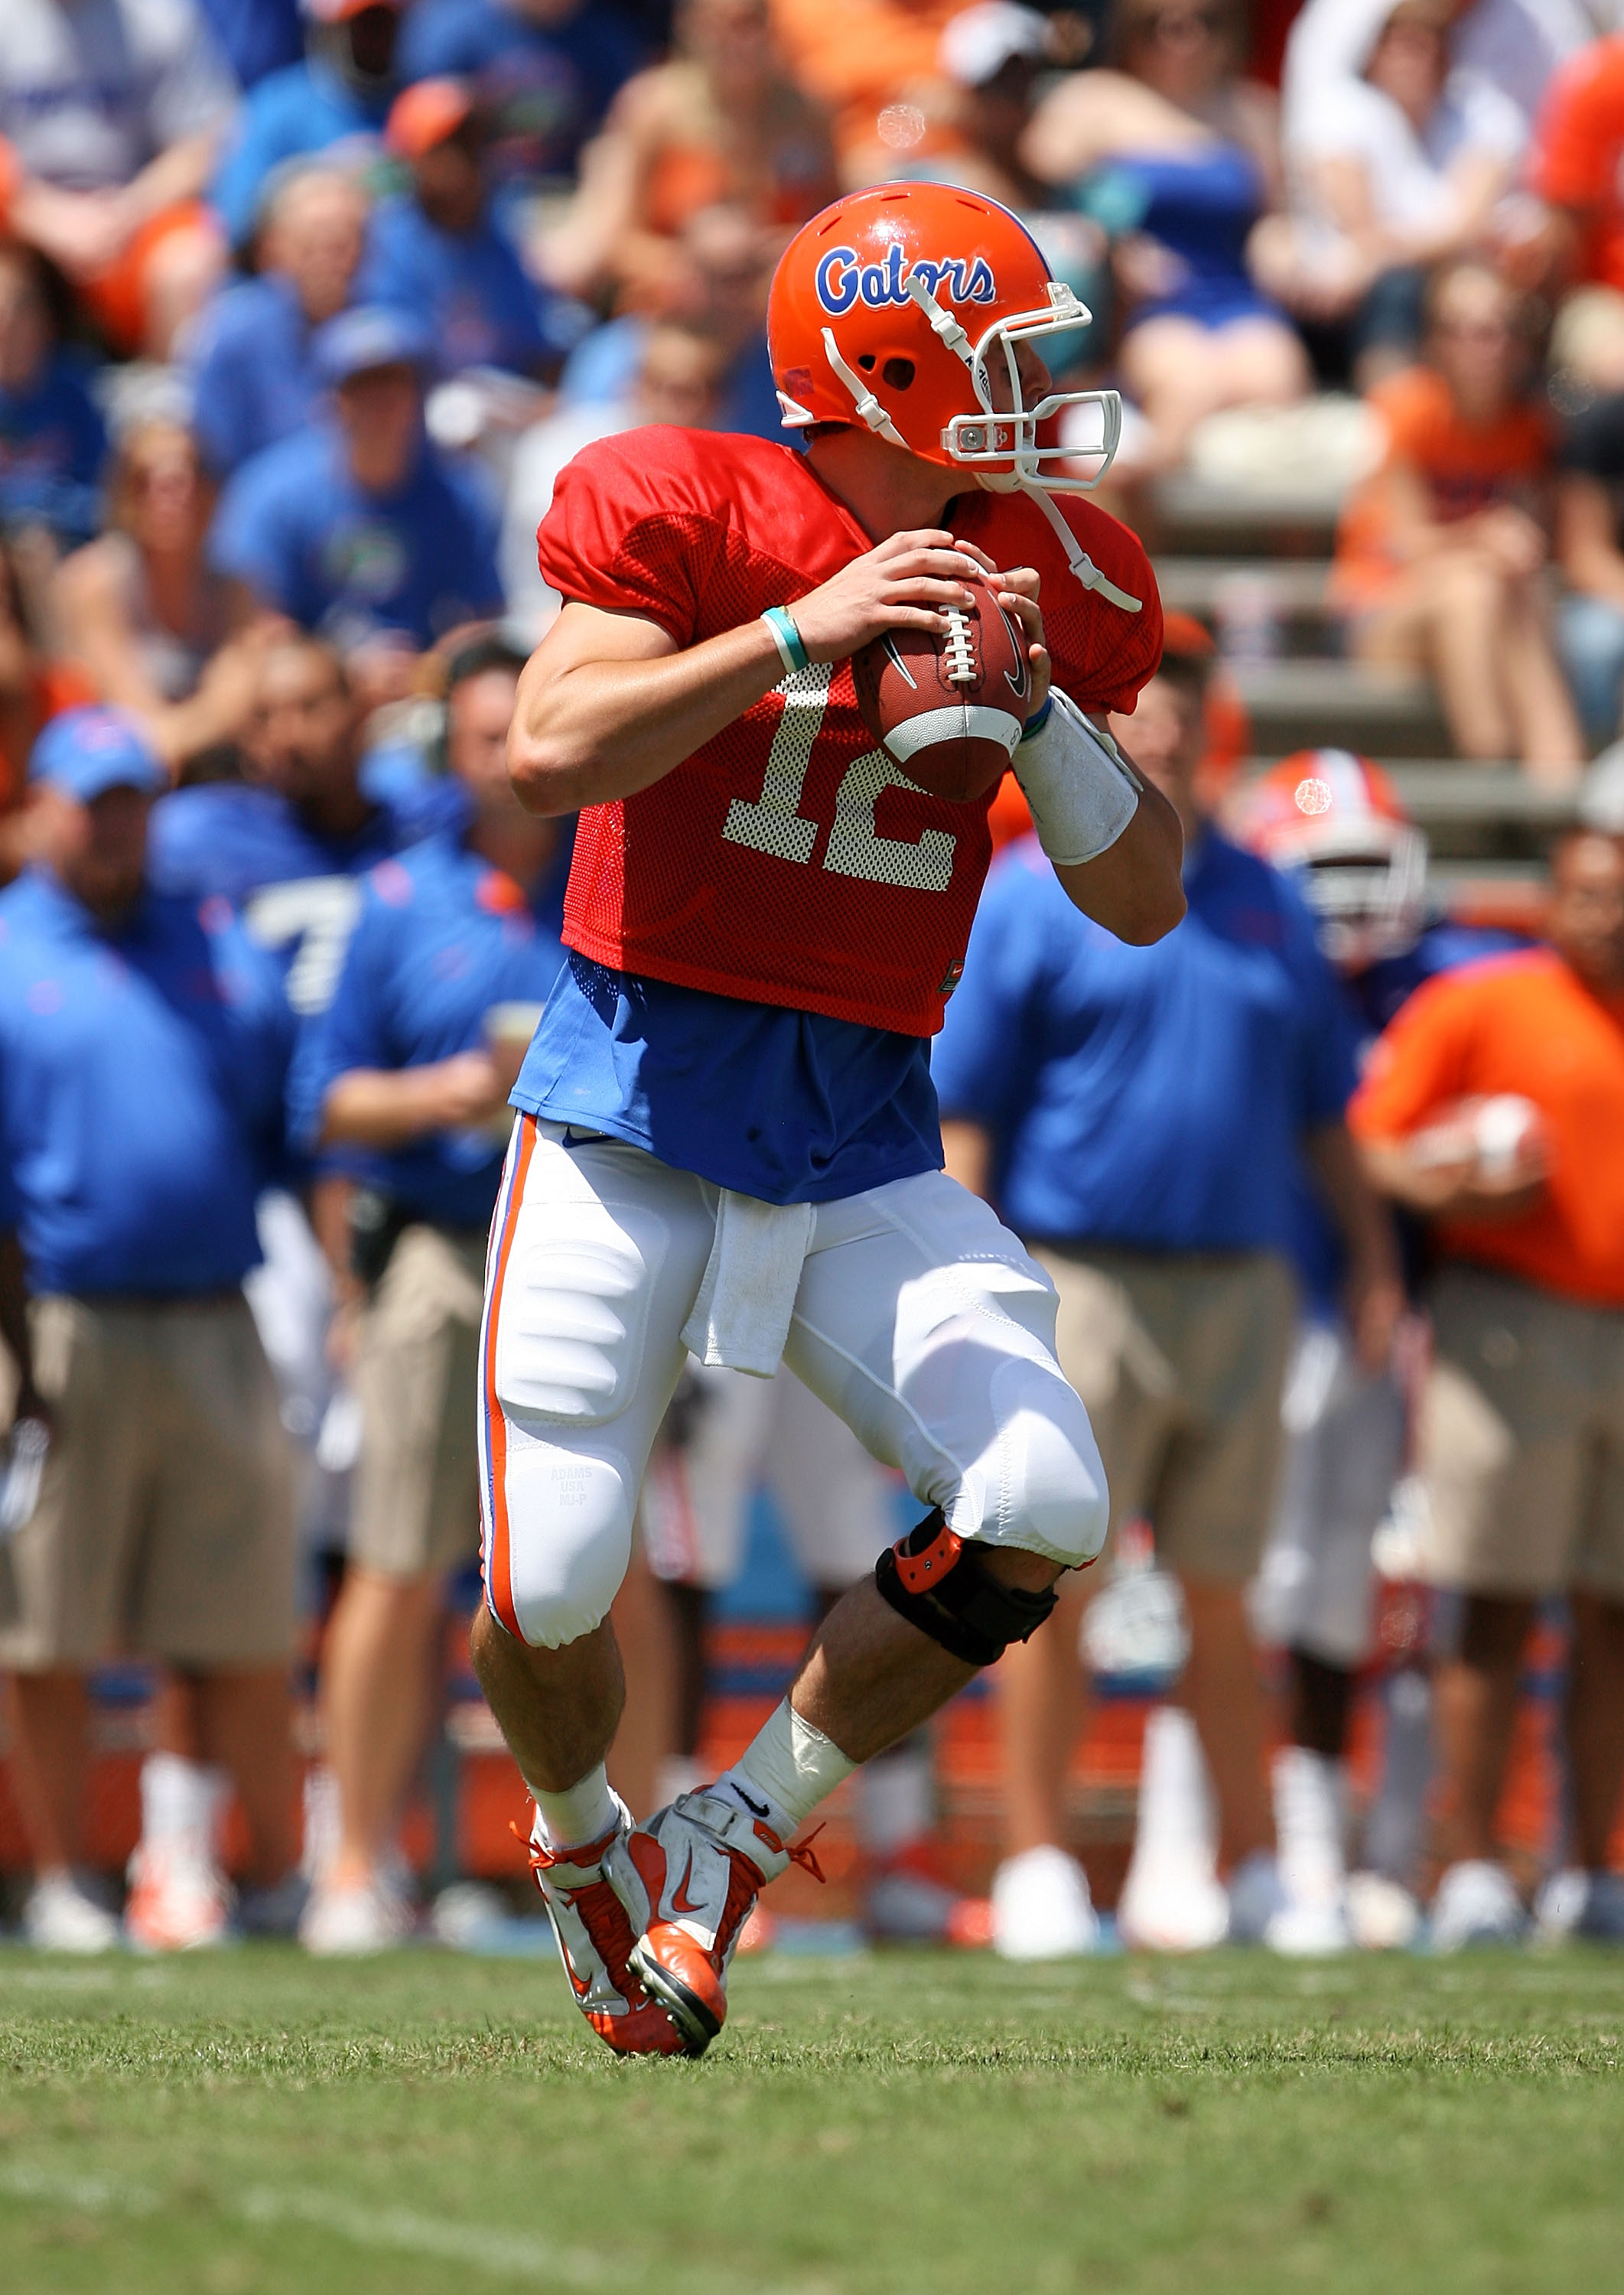 GAINESVILLE, FL - APRIL 10:  Quarterback John Brantley #12 of the Florida Gators drops back to pass during the Orange & Blue game at Ben Hill Griffin Stadium on April 10, 2010 in Gainesville, Florida.  (Photo by Doug Benc/Getty Images)